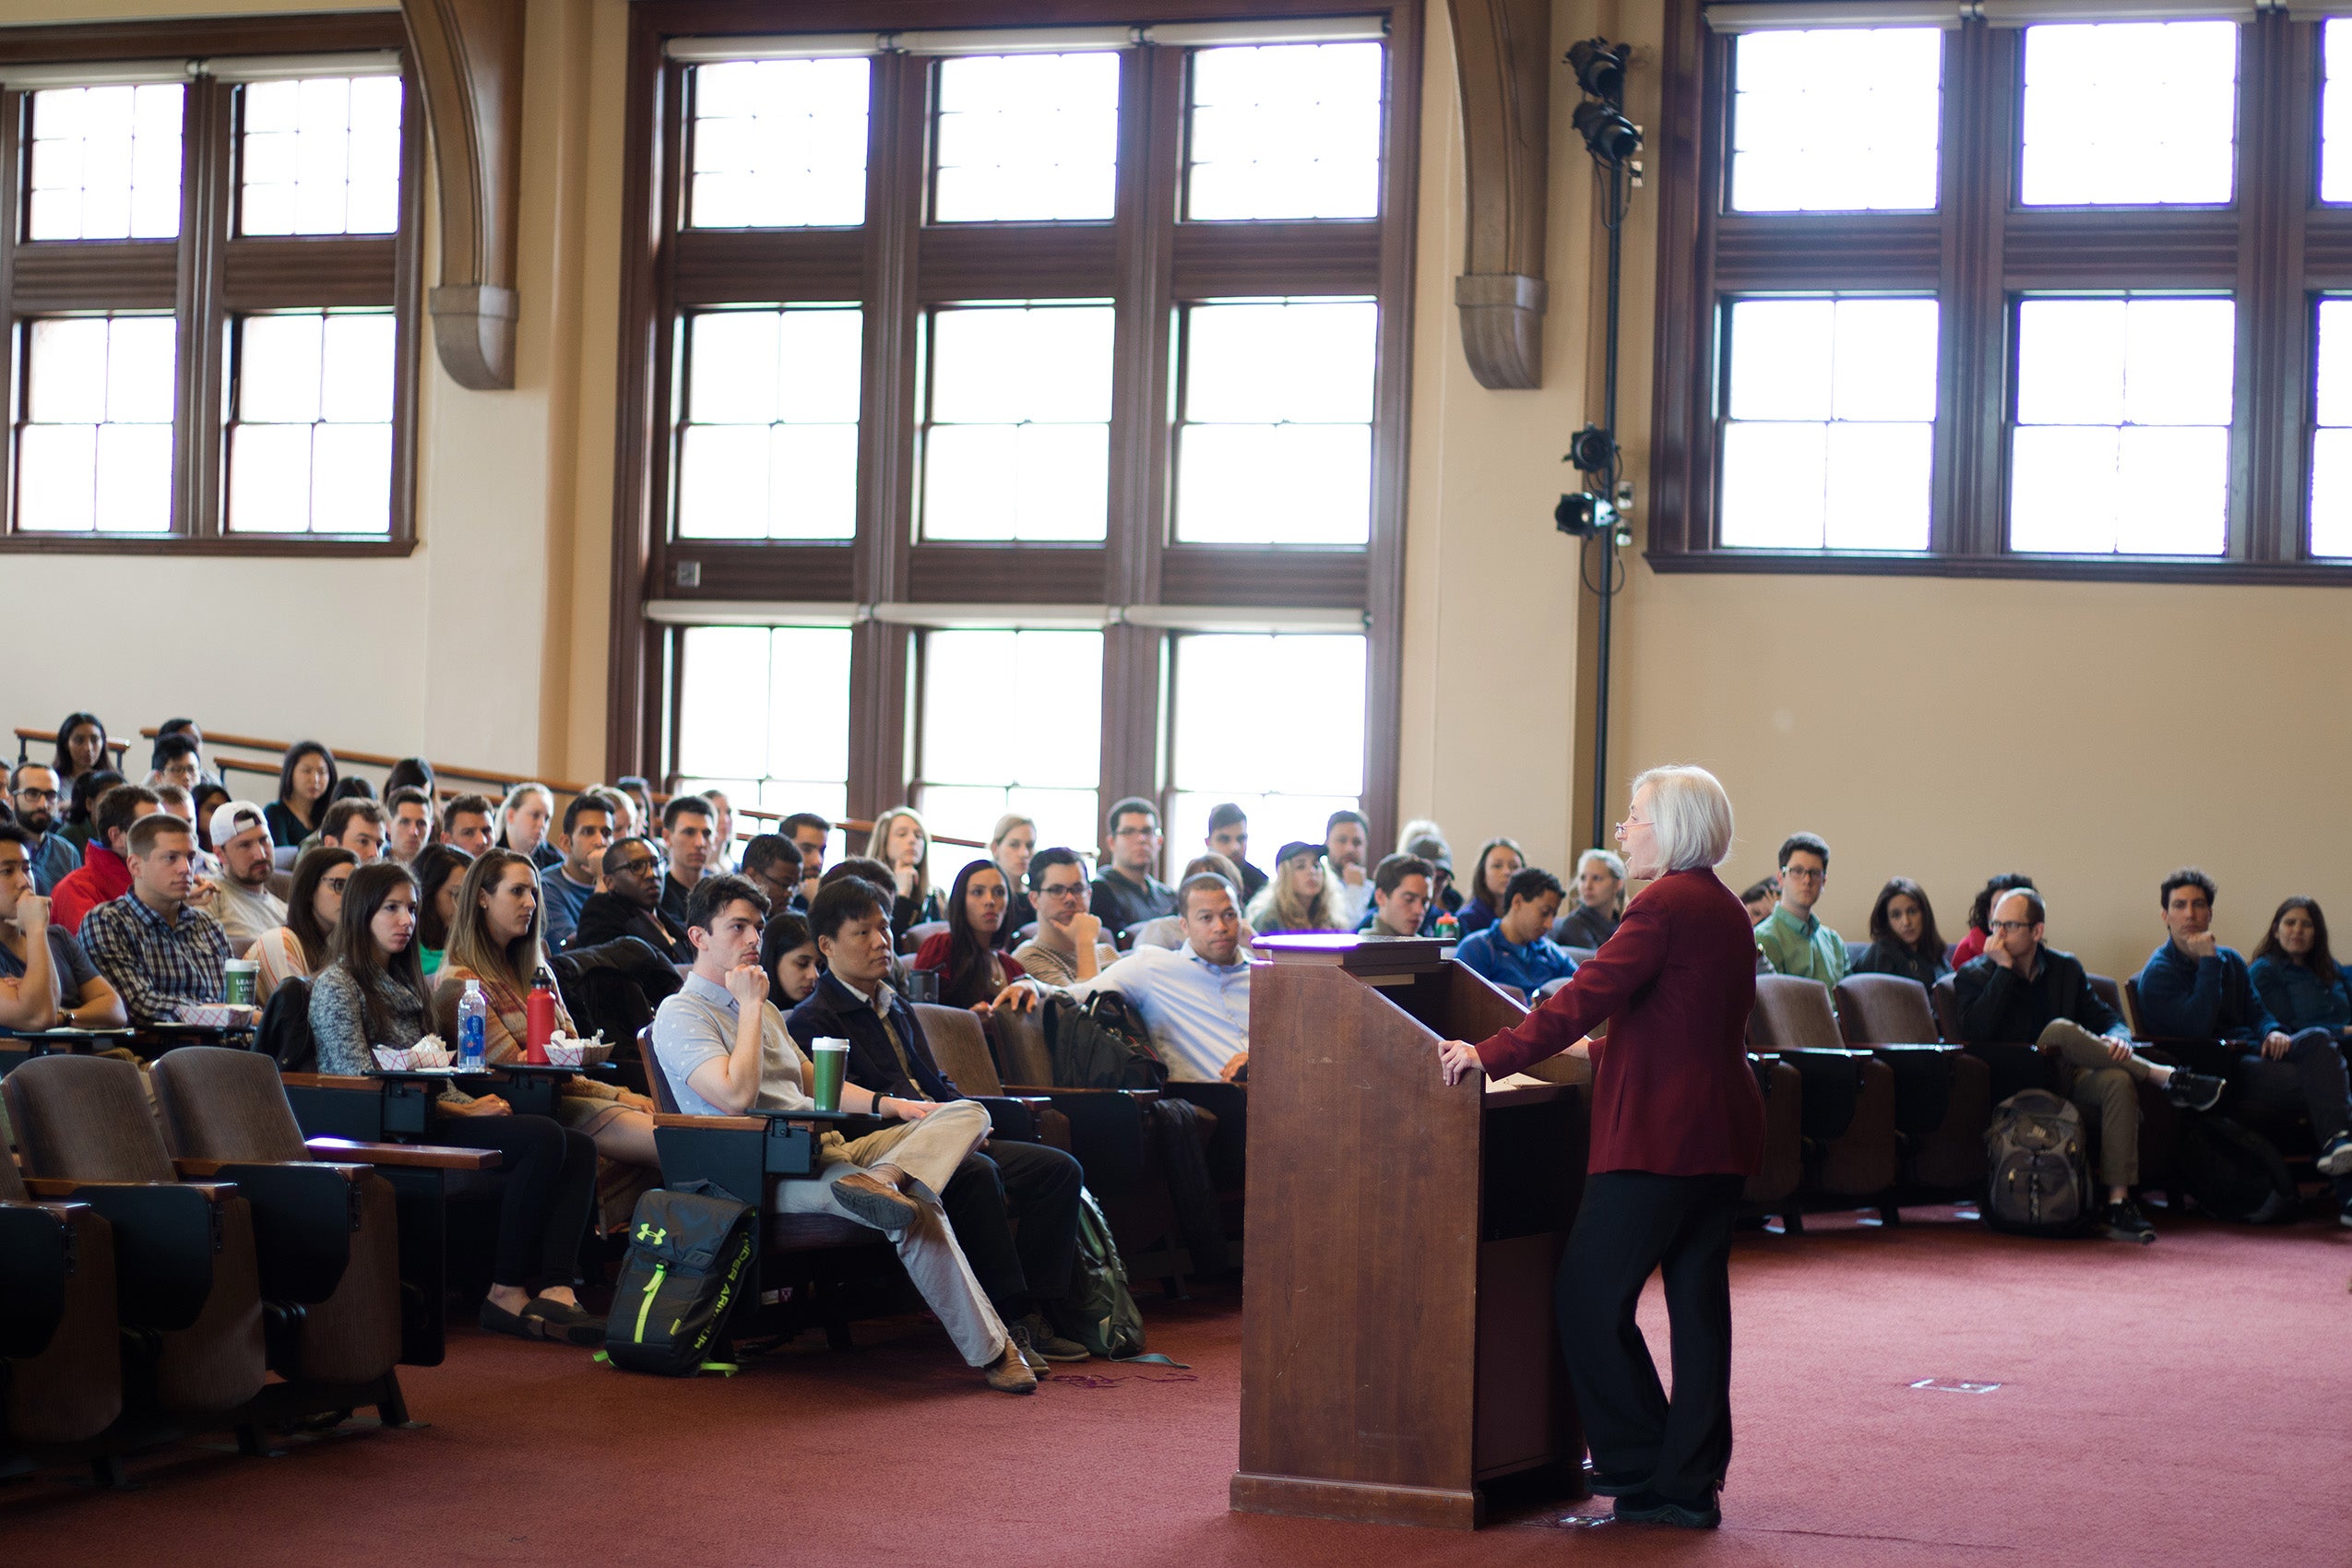 Martha Minow delivering her last lecture